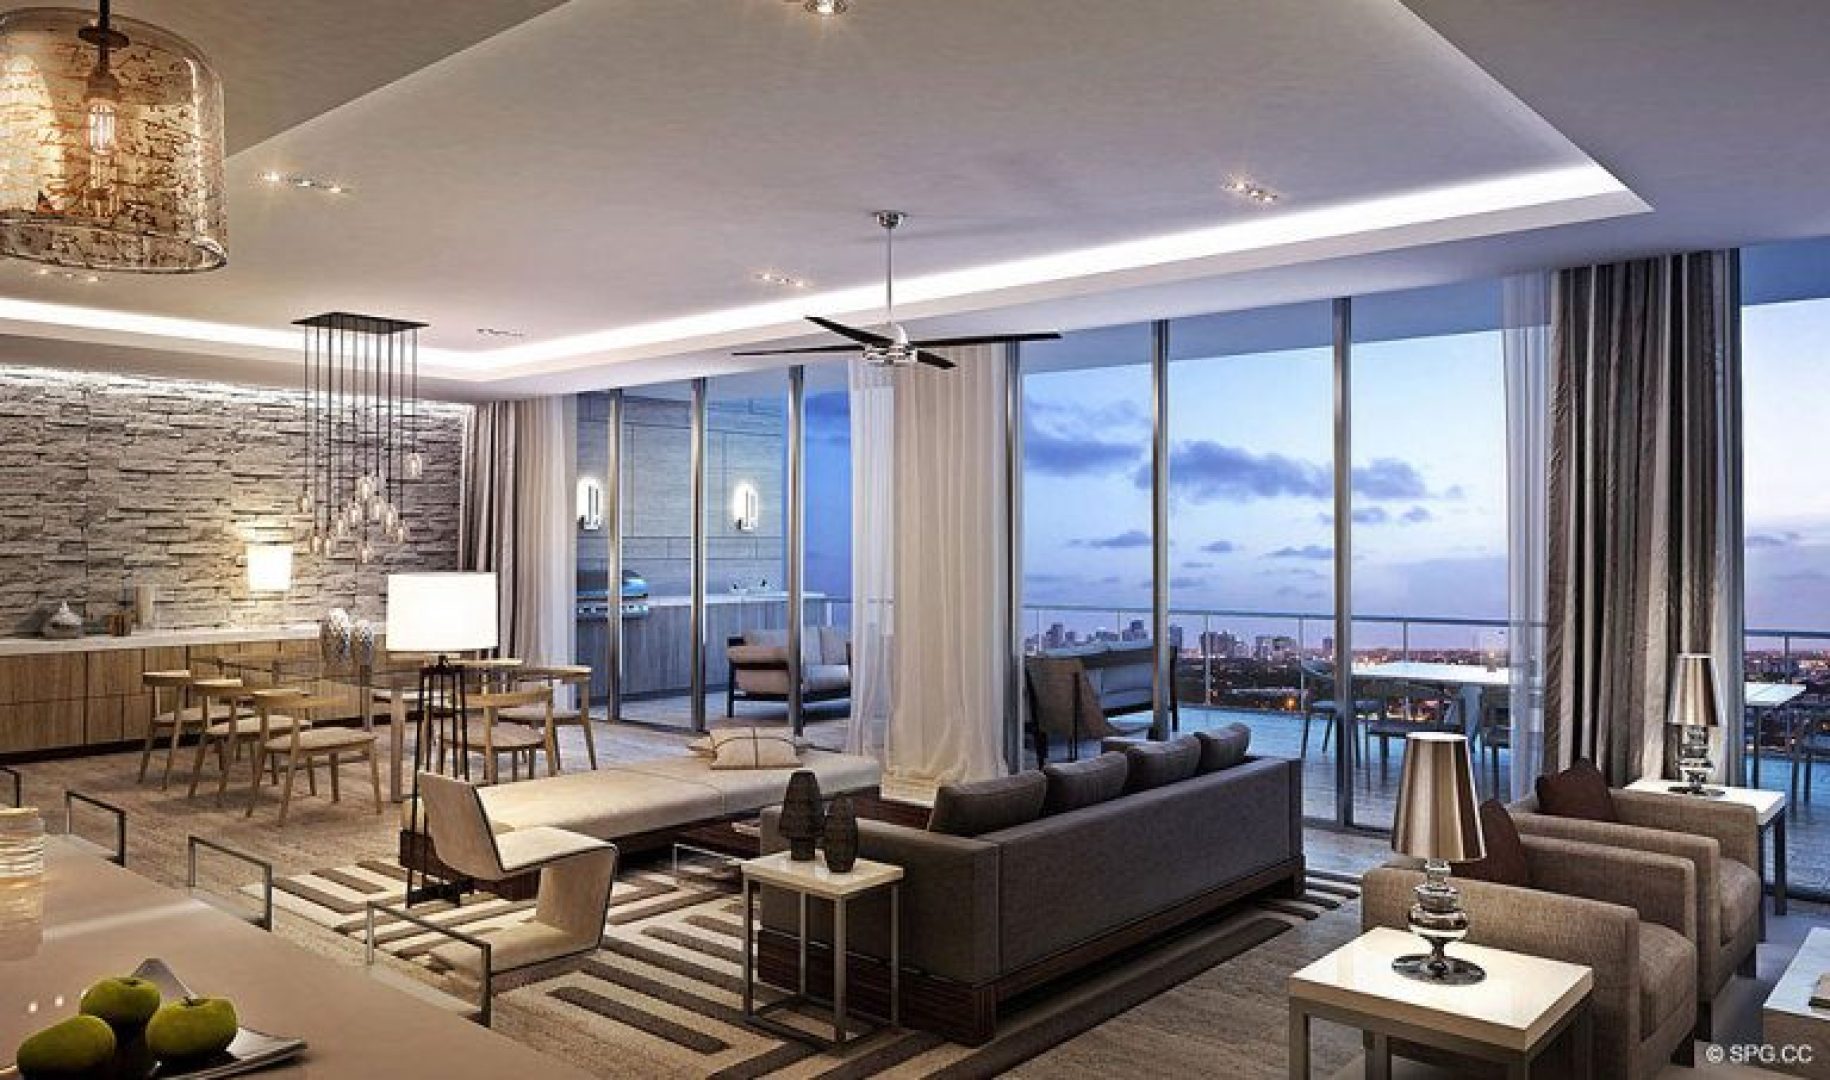 Enjoy Luxury Living at its Finest at Riva, Luxury Waterfront Condos in Fort Lauderdale, Florida 33304.